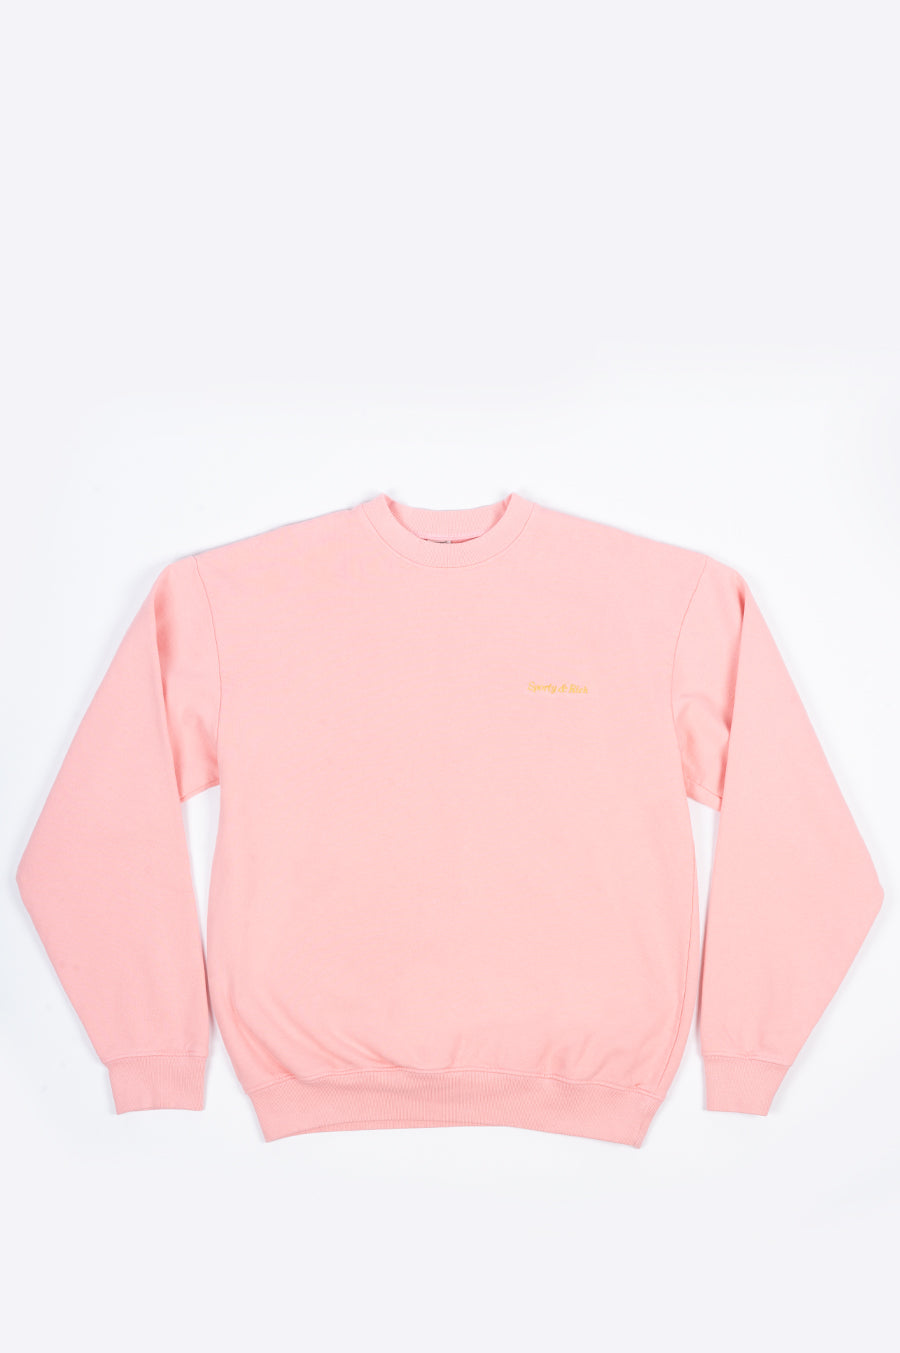 SPORTY AND RICH CLASSIC LOGO CREWNECK PINK